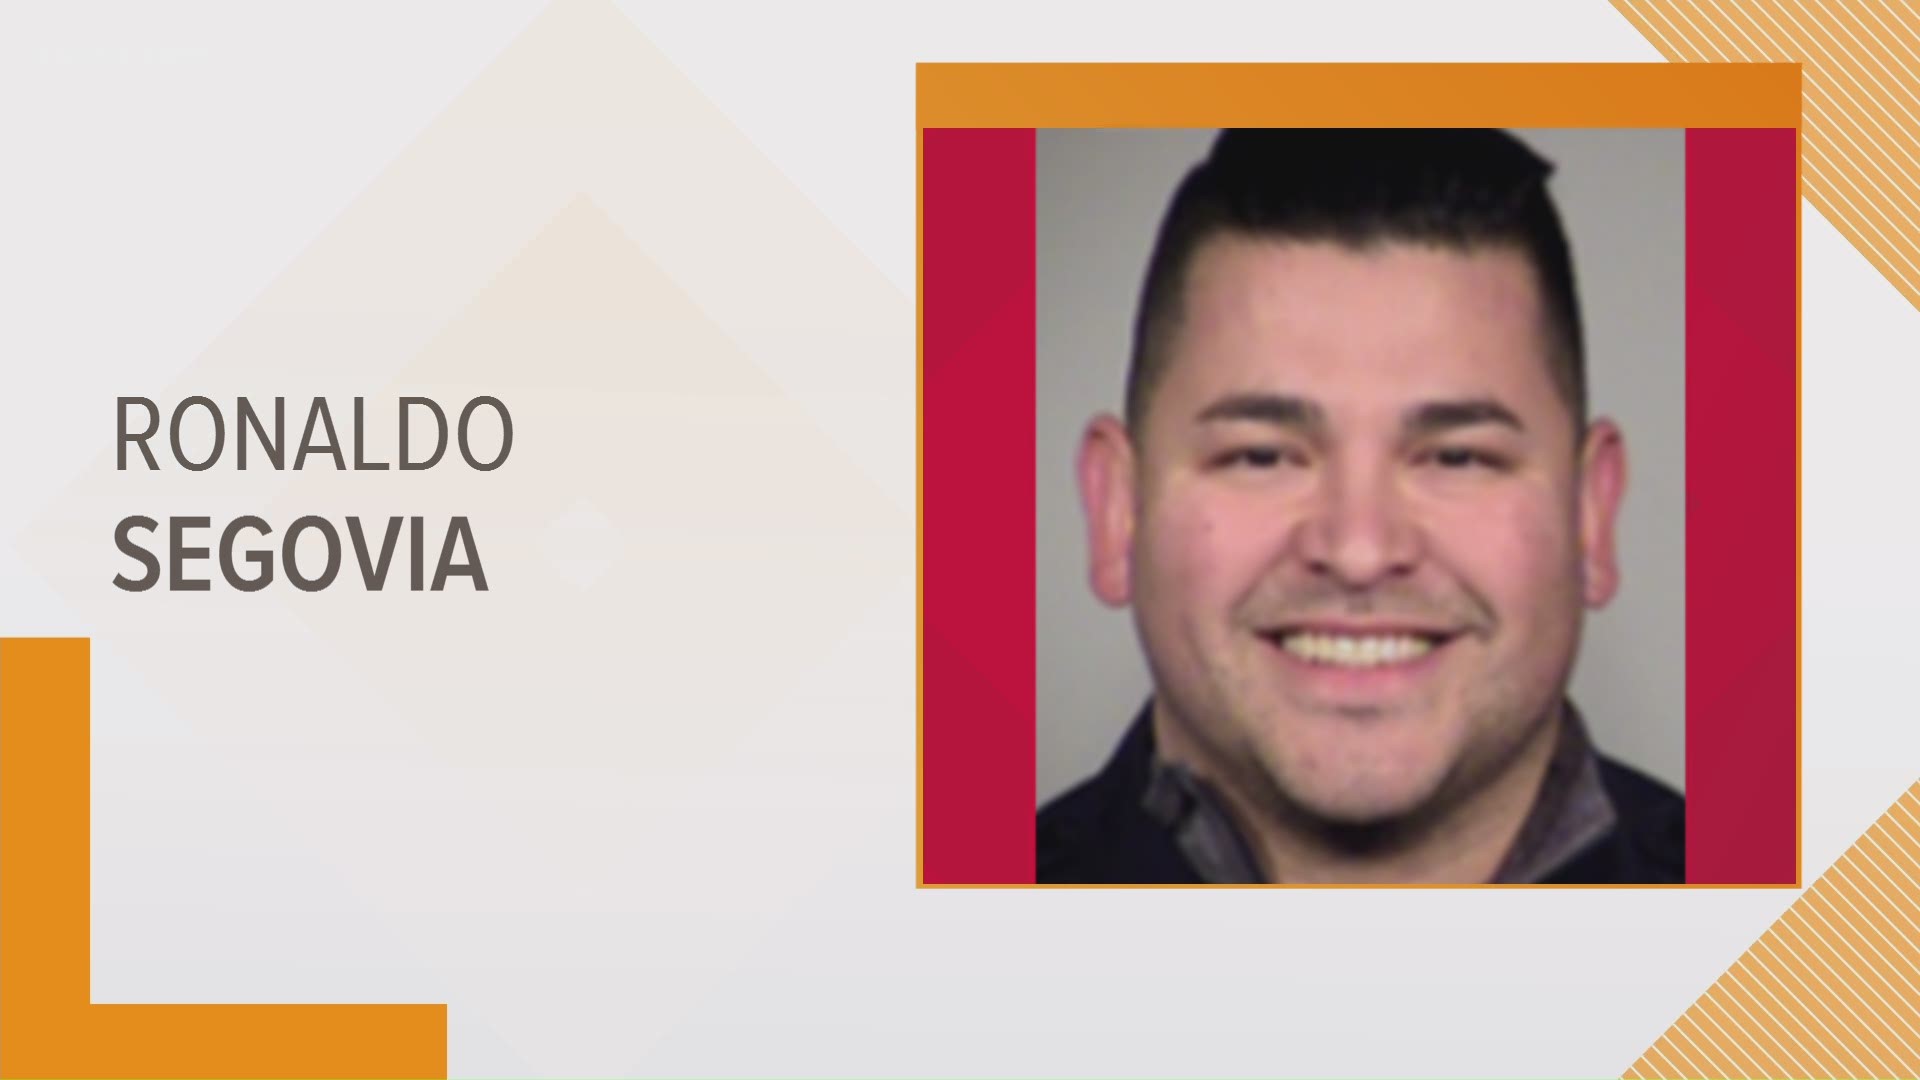 Ronaldo Segovia was accused of checking a license plate number for a "non-police purpose" in May 2019.